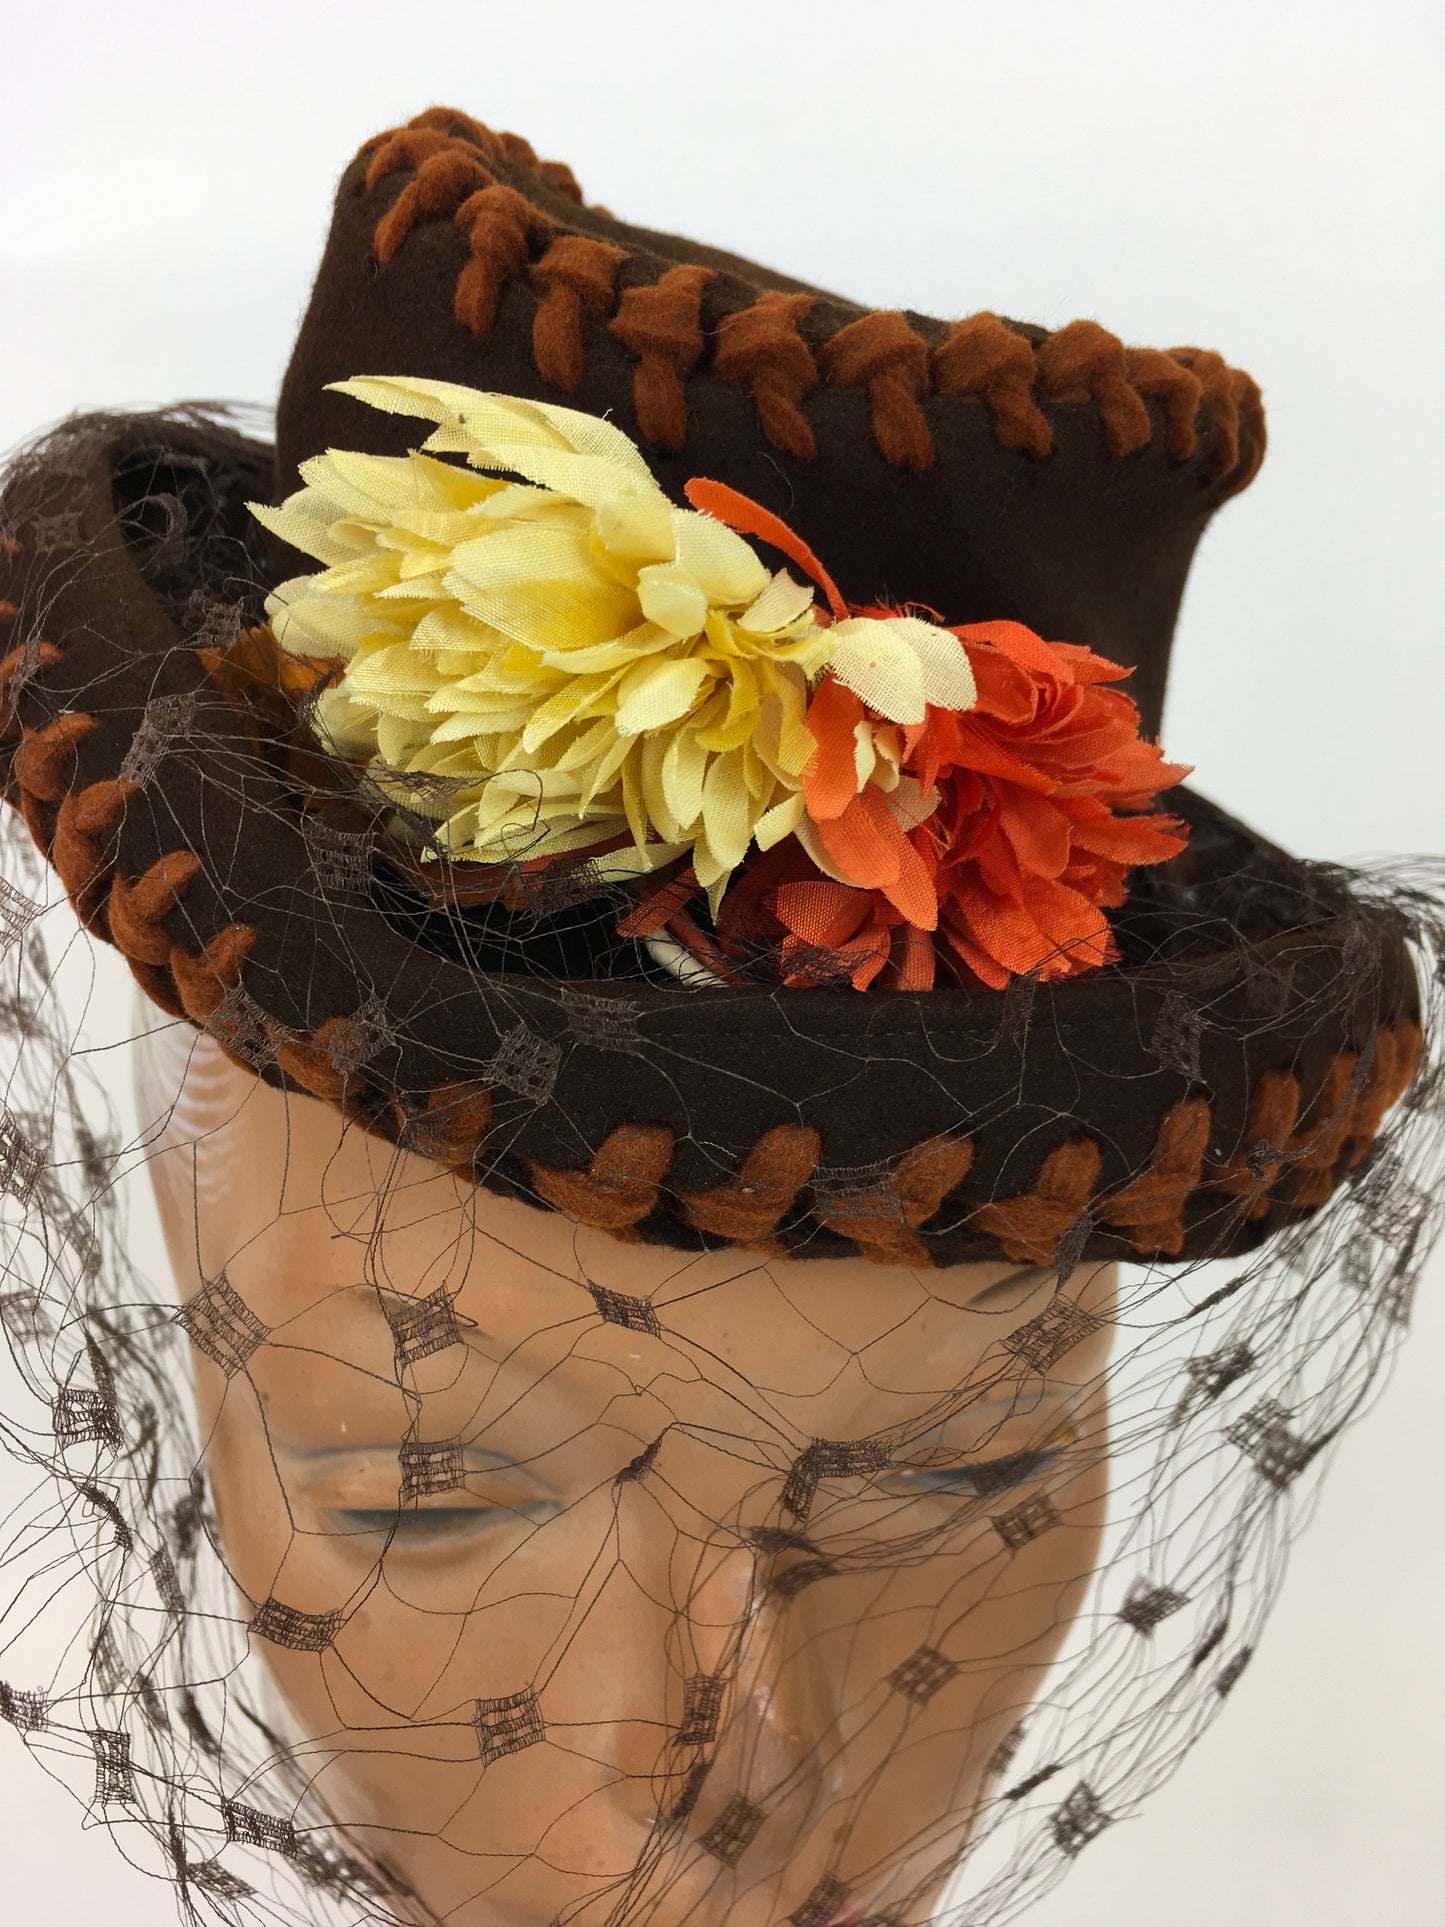 Original STUNNING 1940s American Topper Hat - In an Autumnal Colour Pallet of Warm Brown, Oranges and Yellow